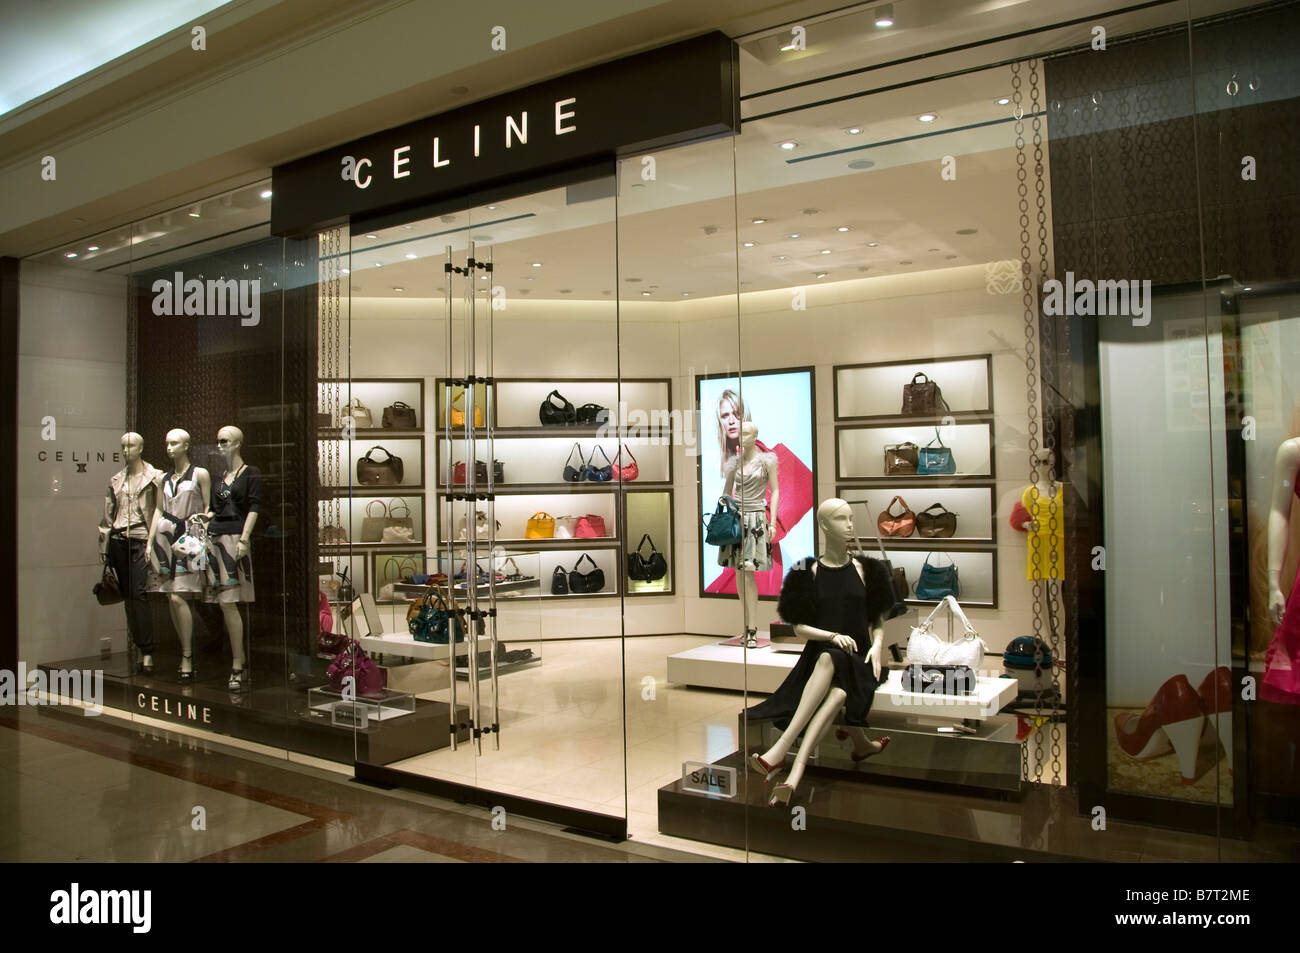 Celine Ngee Ann City Singapore Orchard road people modern fashion Stock ...